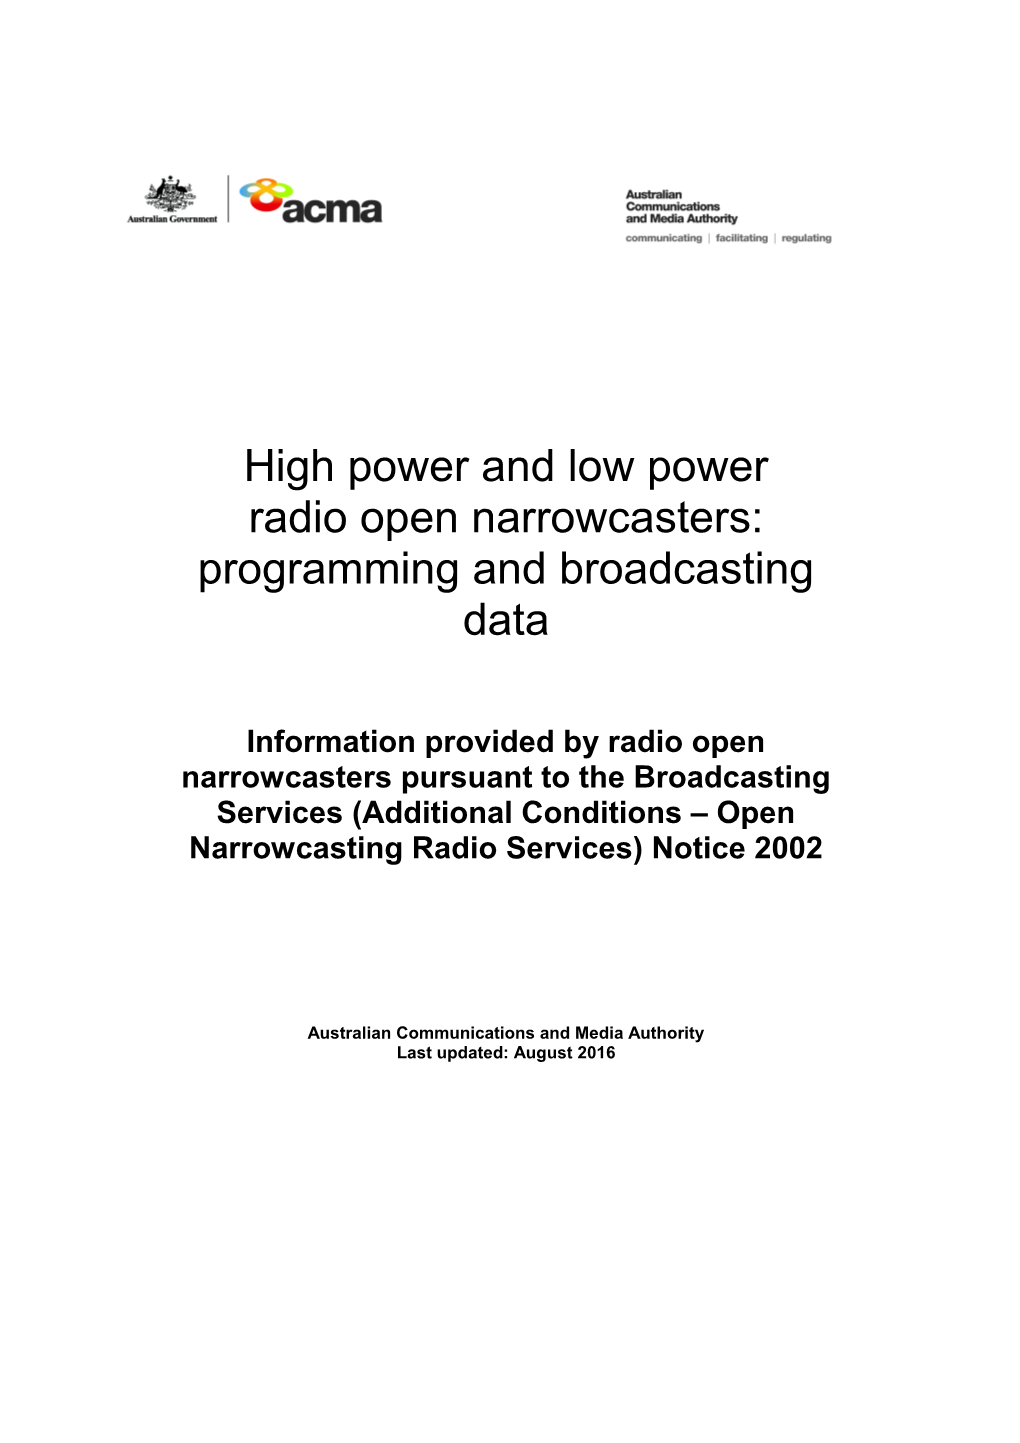 High Power and Low Power Radio Open Narrowcasters: Programming and Broadcasting Data